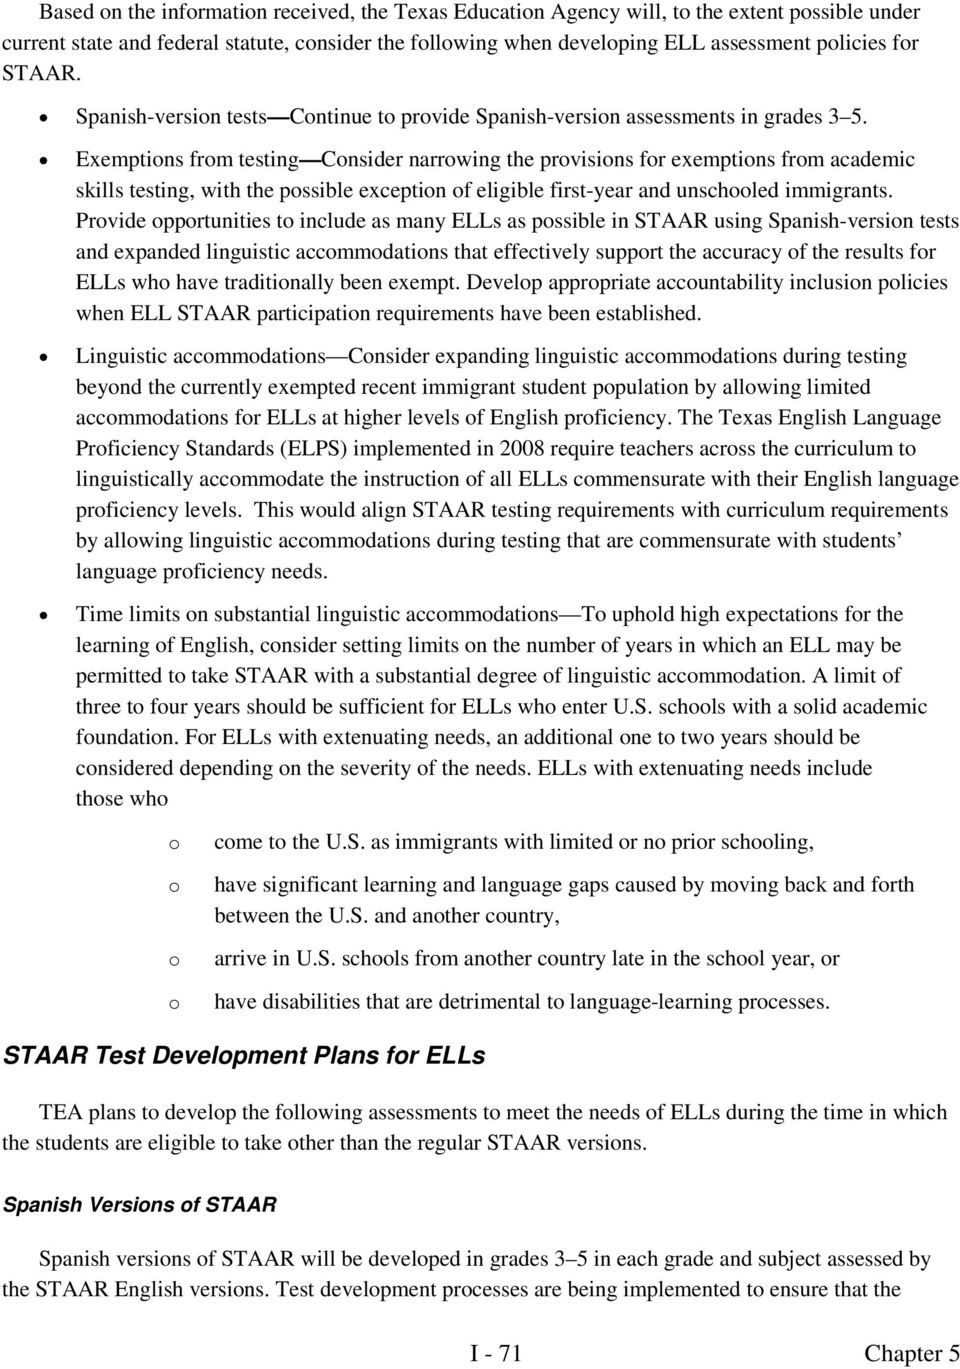 Exemptions from testing Consider narrowing the provisions for exemptions from academic skills testing, with the possible exception of eligible first-year and unschooled immigrants.